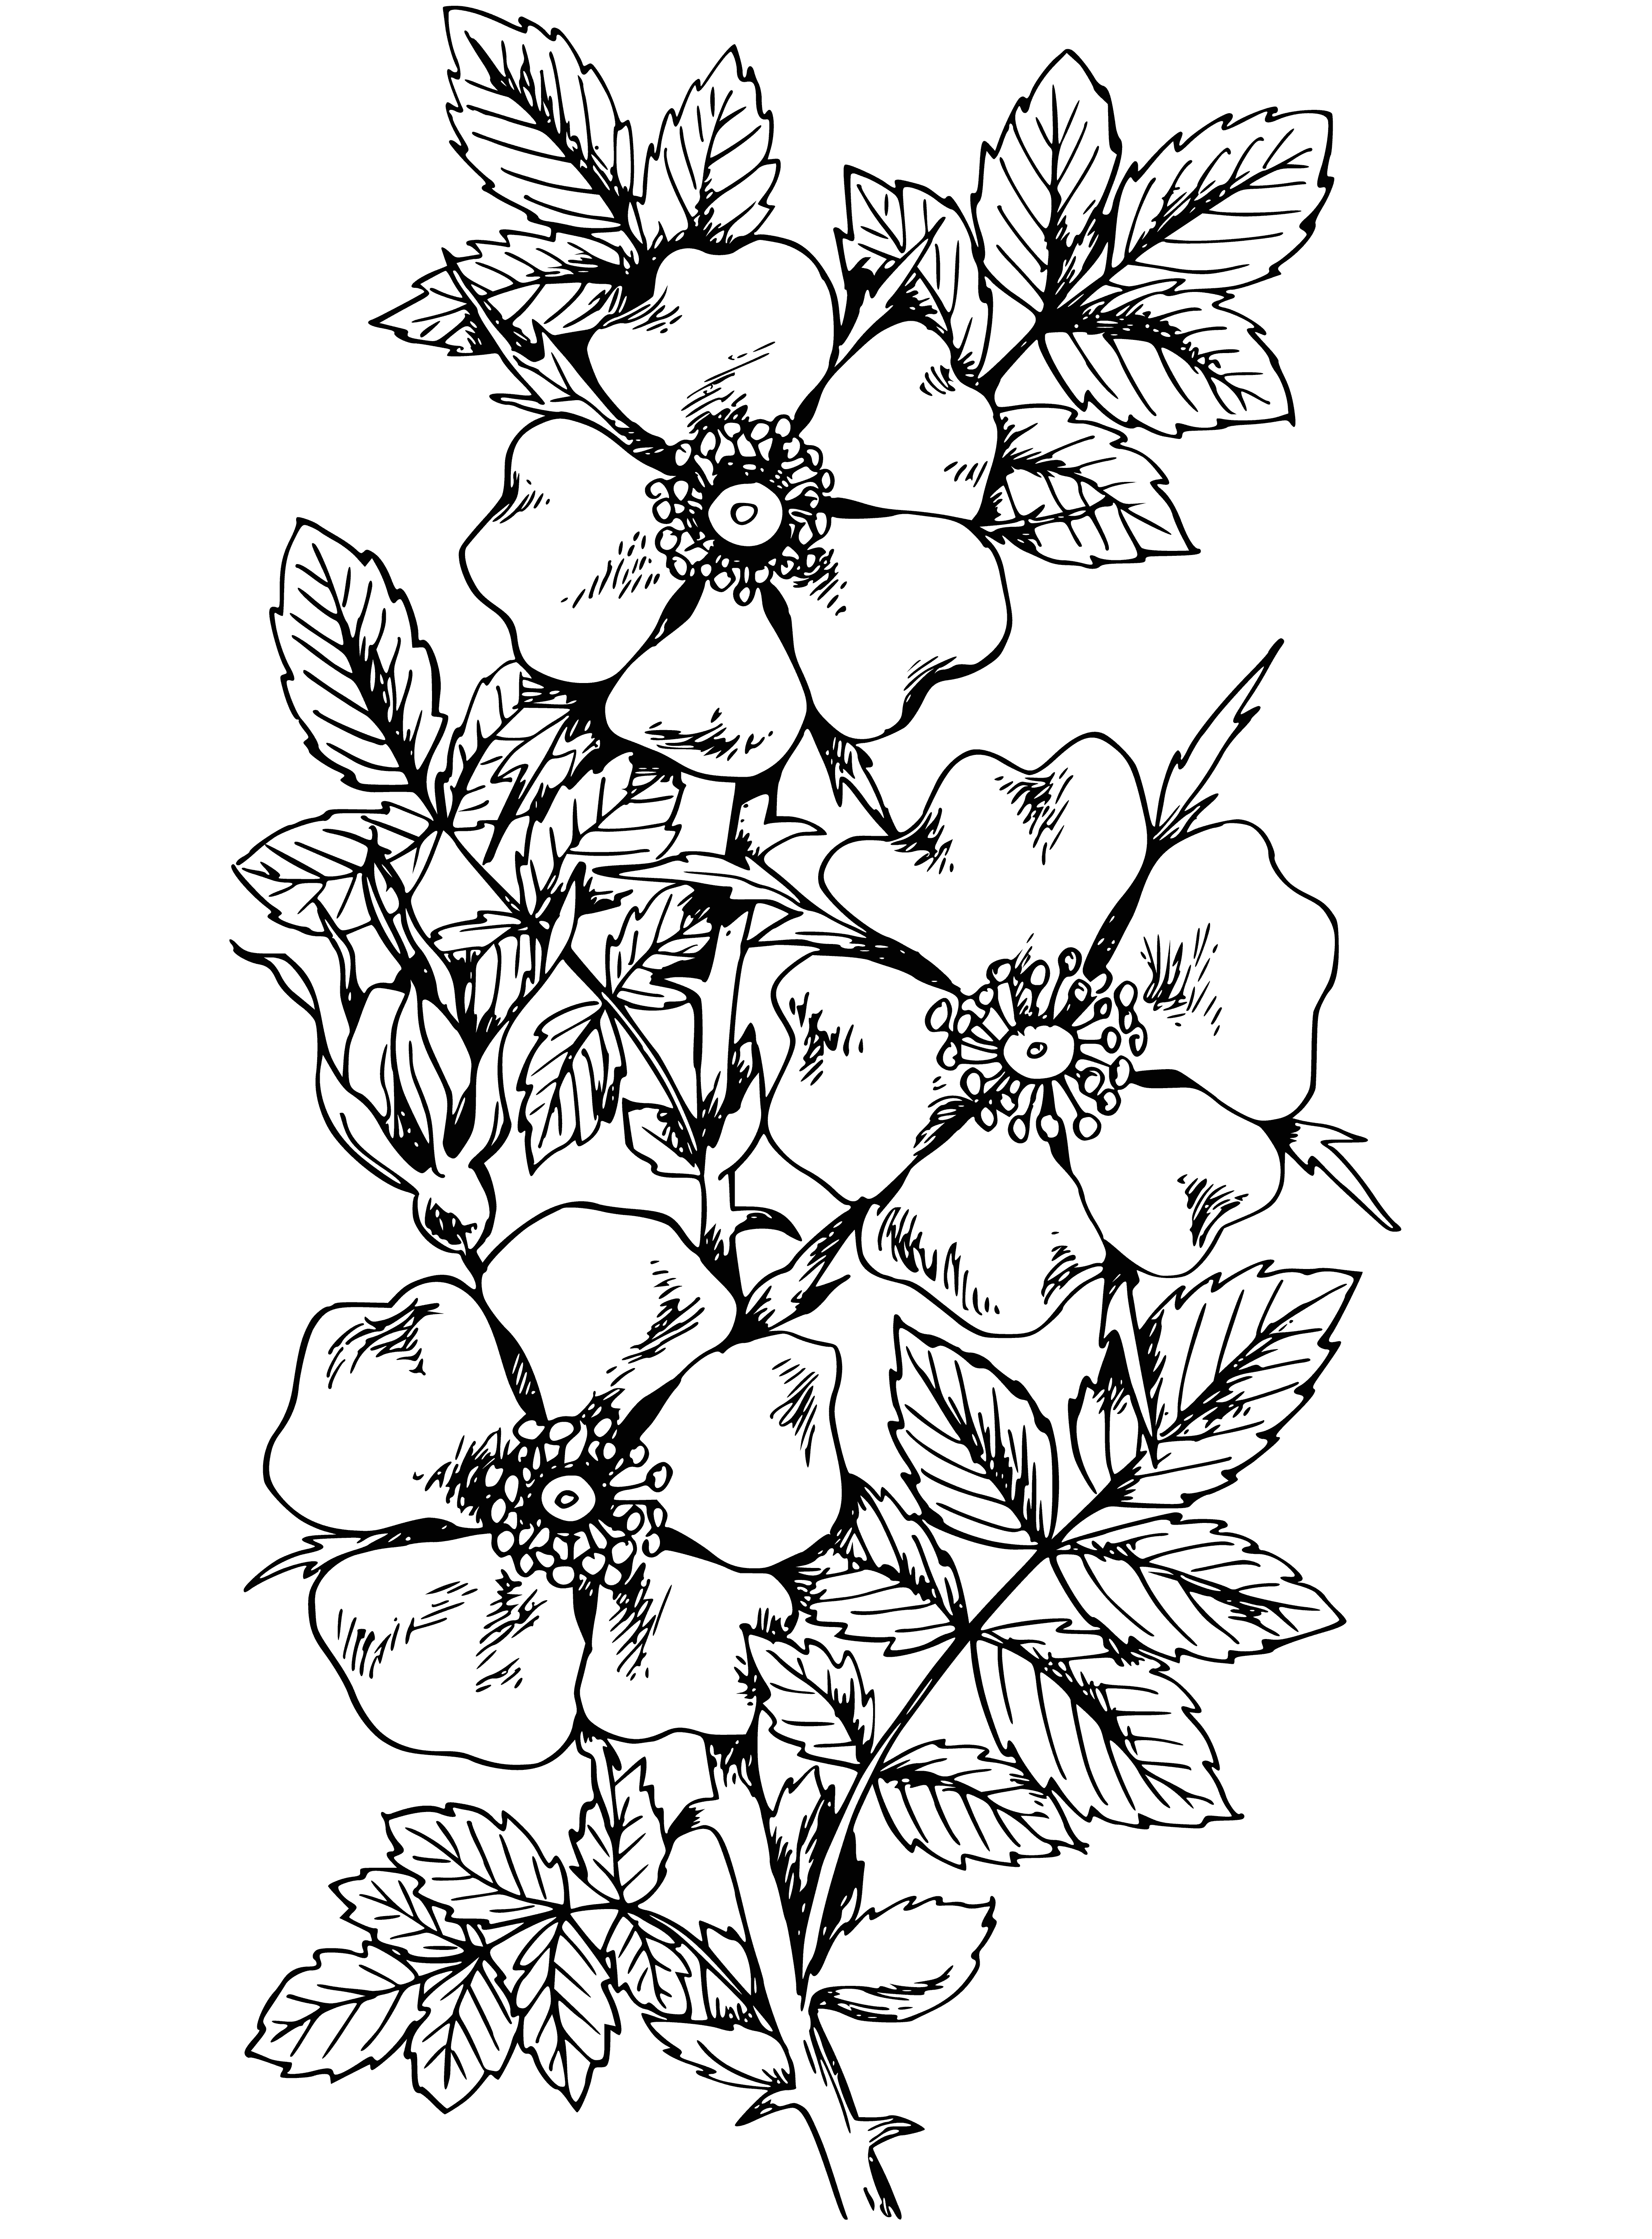 coloring page: Green-leafed plant with thorns on stem & red fruit.